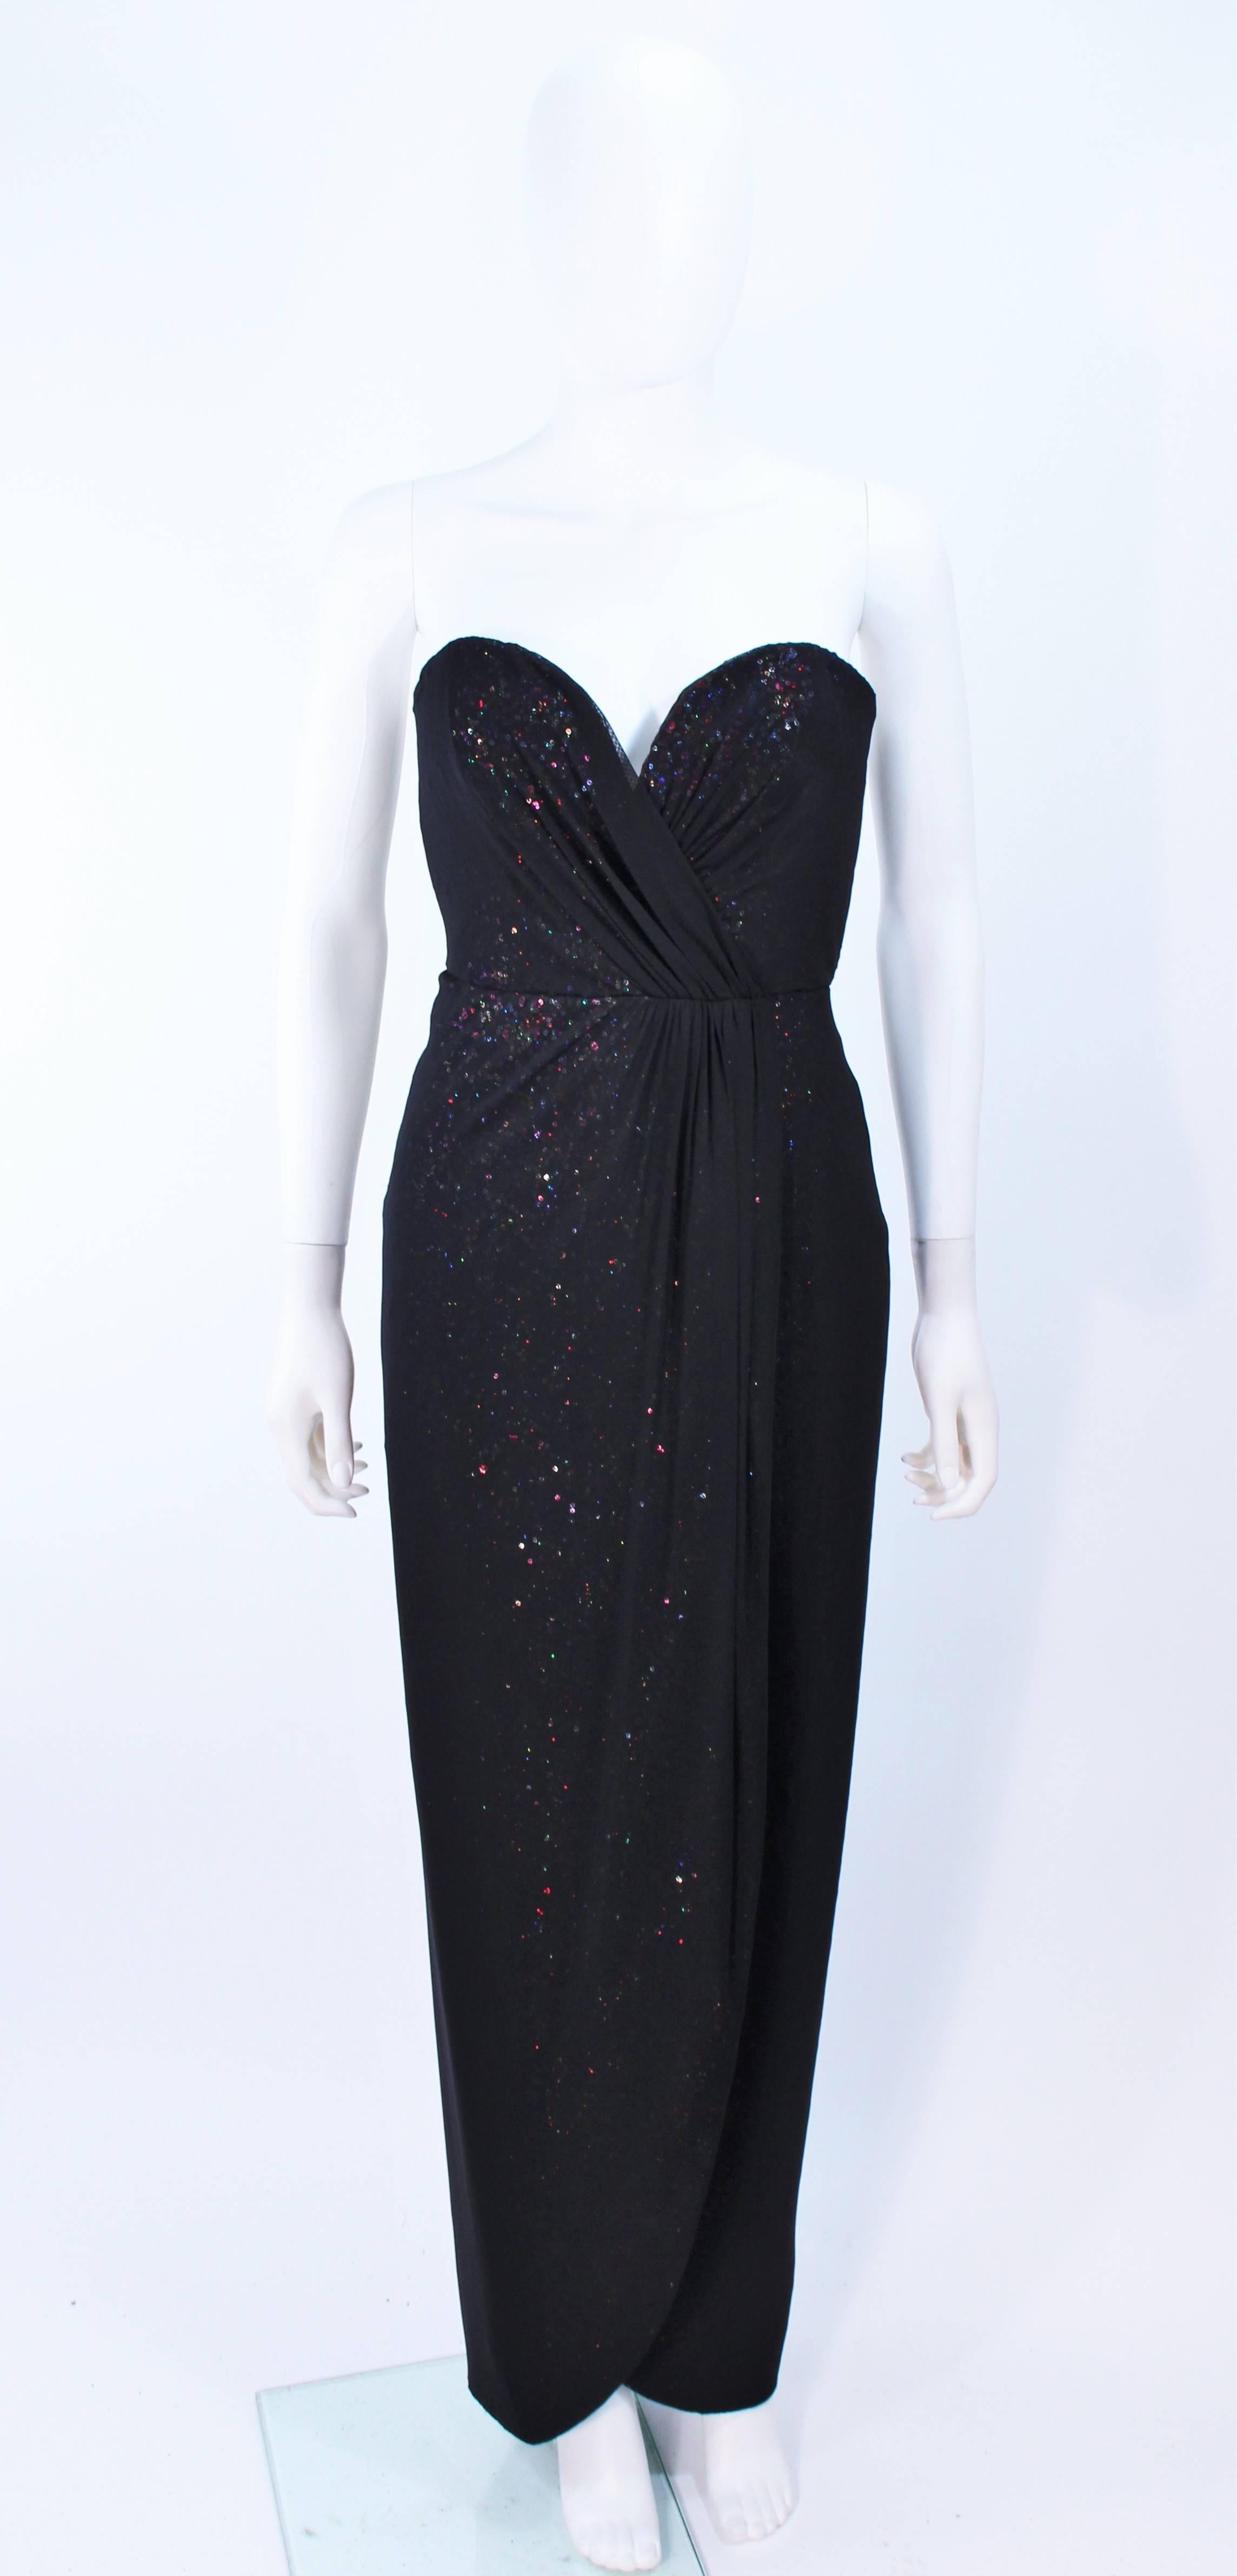 This Vicky Tiel Gown is composed of a black mesh overlaying a rainbow iridescent sequin interior. There is a center back zipper closure with hook and eye. Boned interior. In excellent condition, with original tags and unworn.

**Please